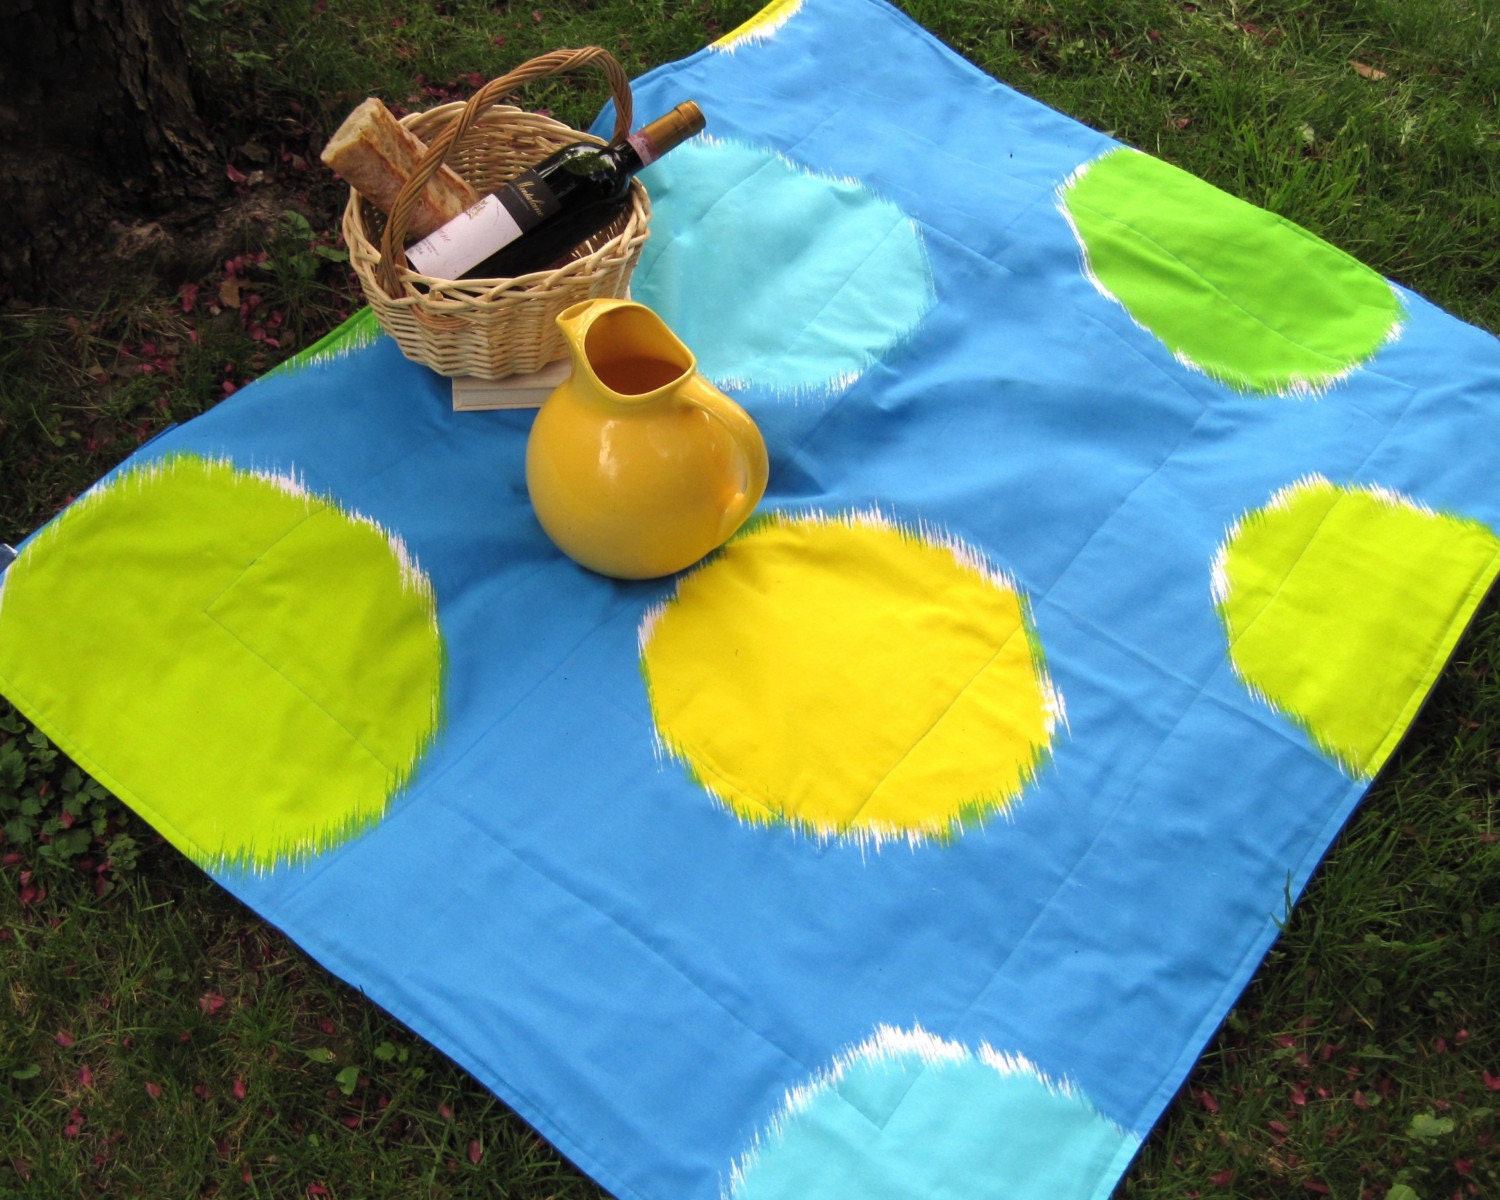 mod Marimekko picnic blanket / turquoise yellow pops of color (only one)